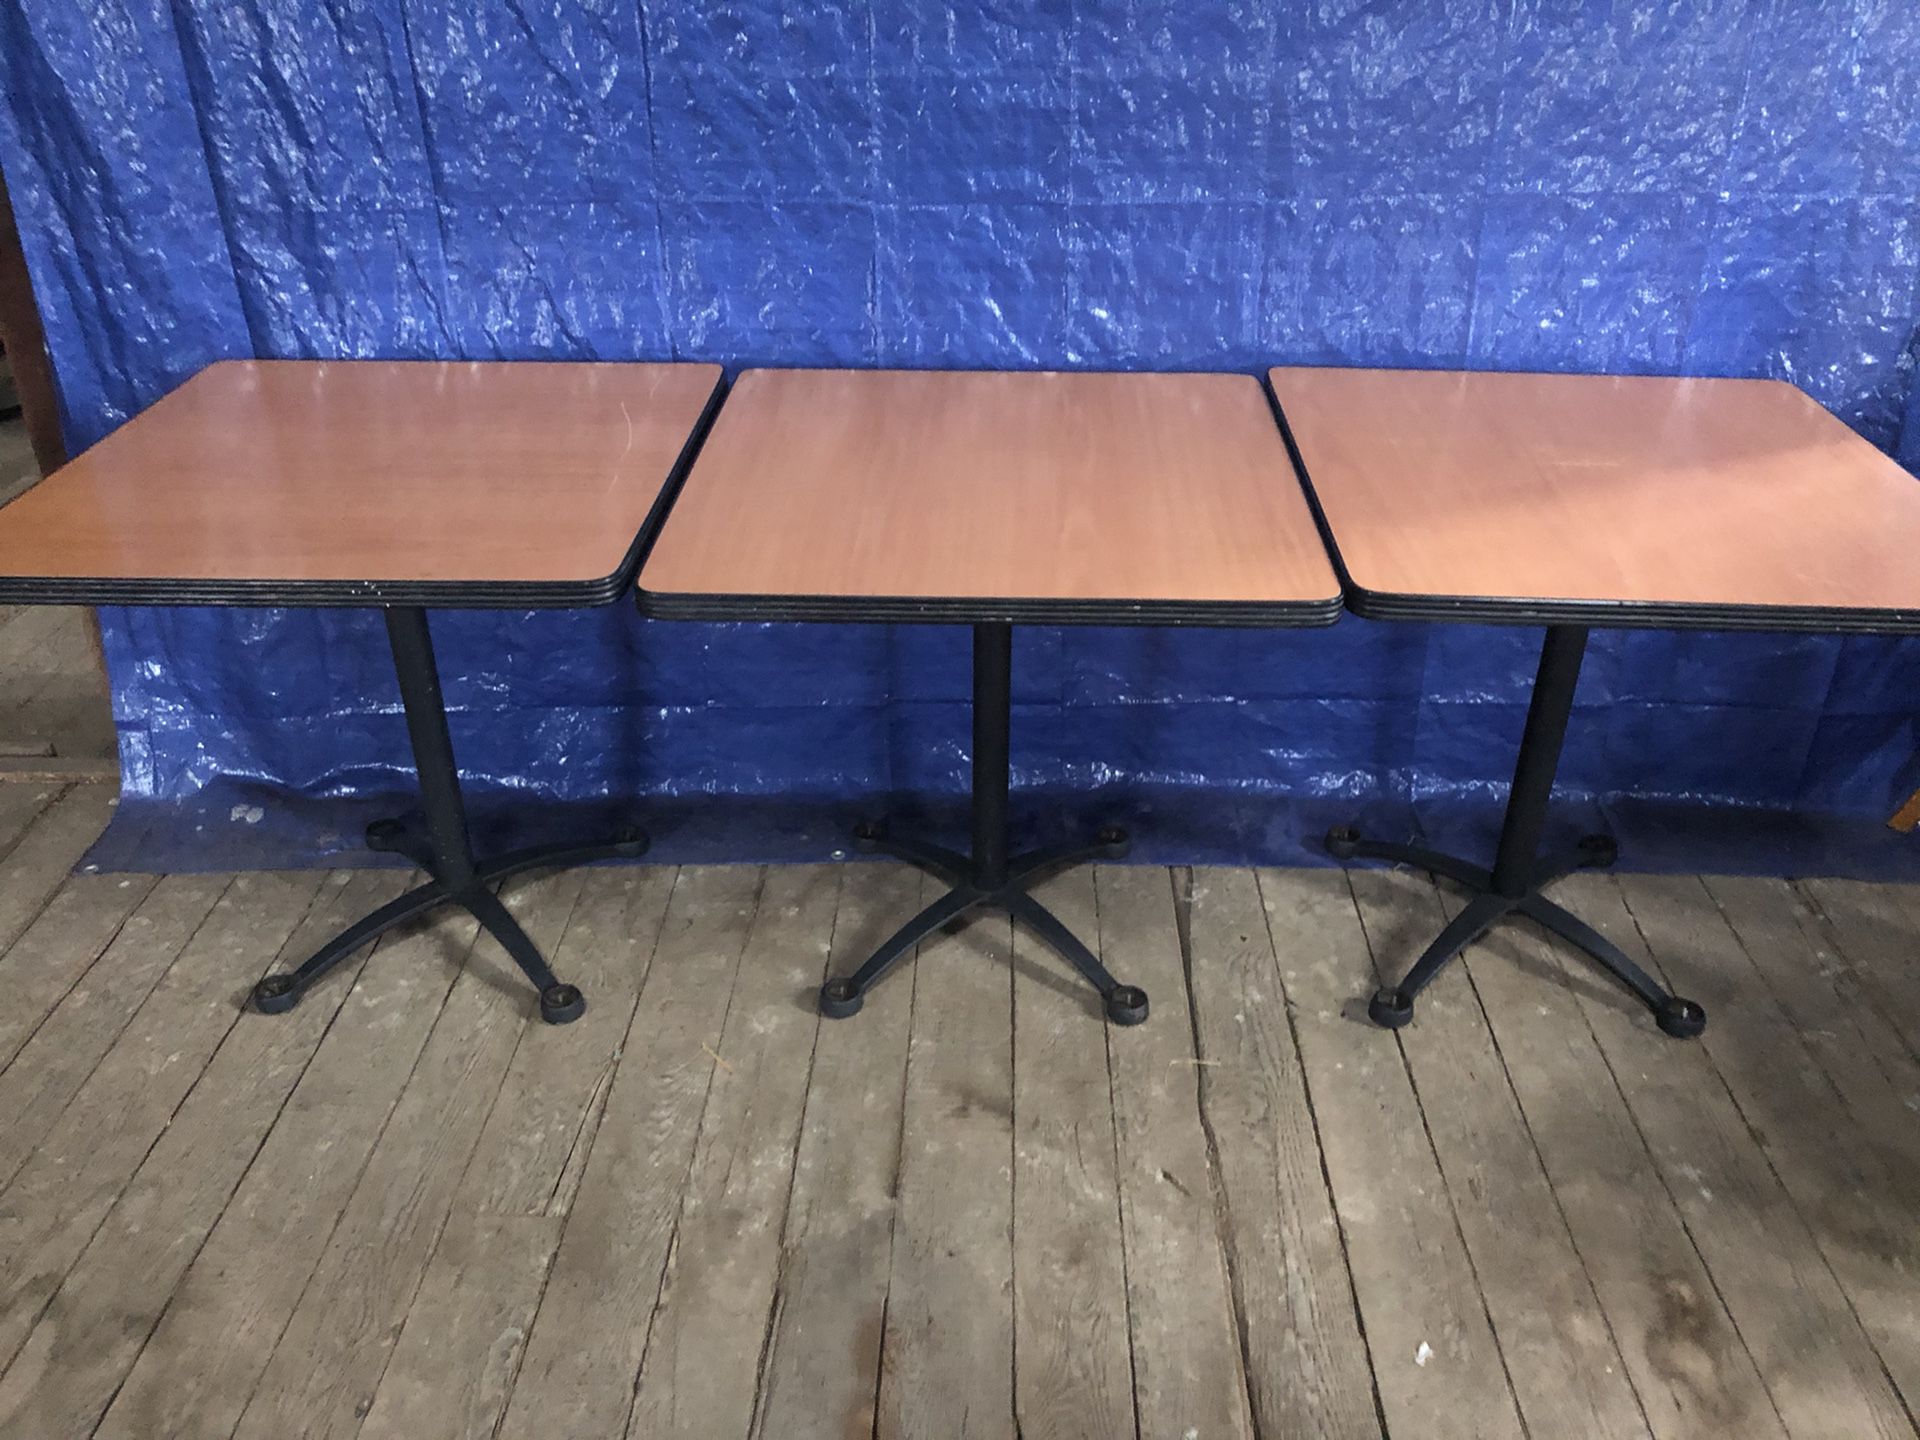 3 used tables